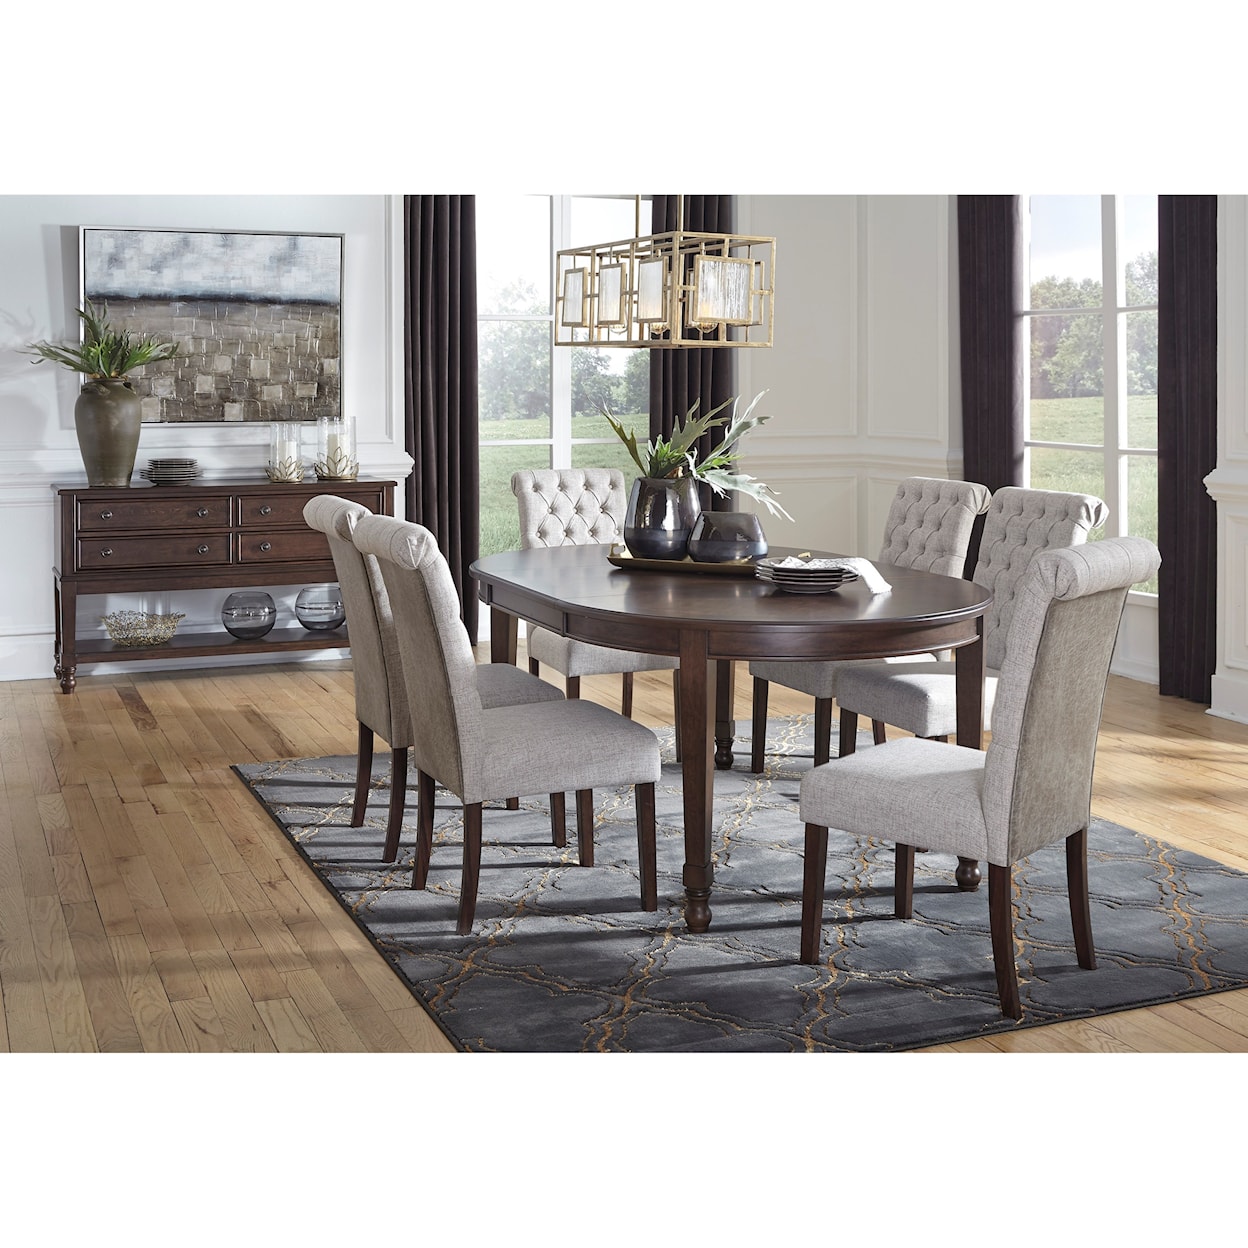 Signature Design by Ashley Adinton Formal Dining Room Group